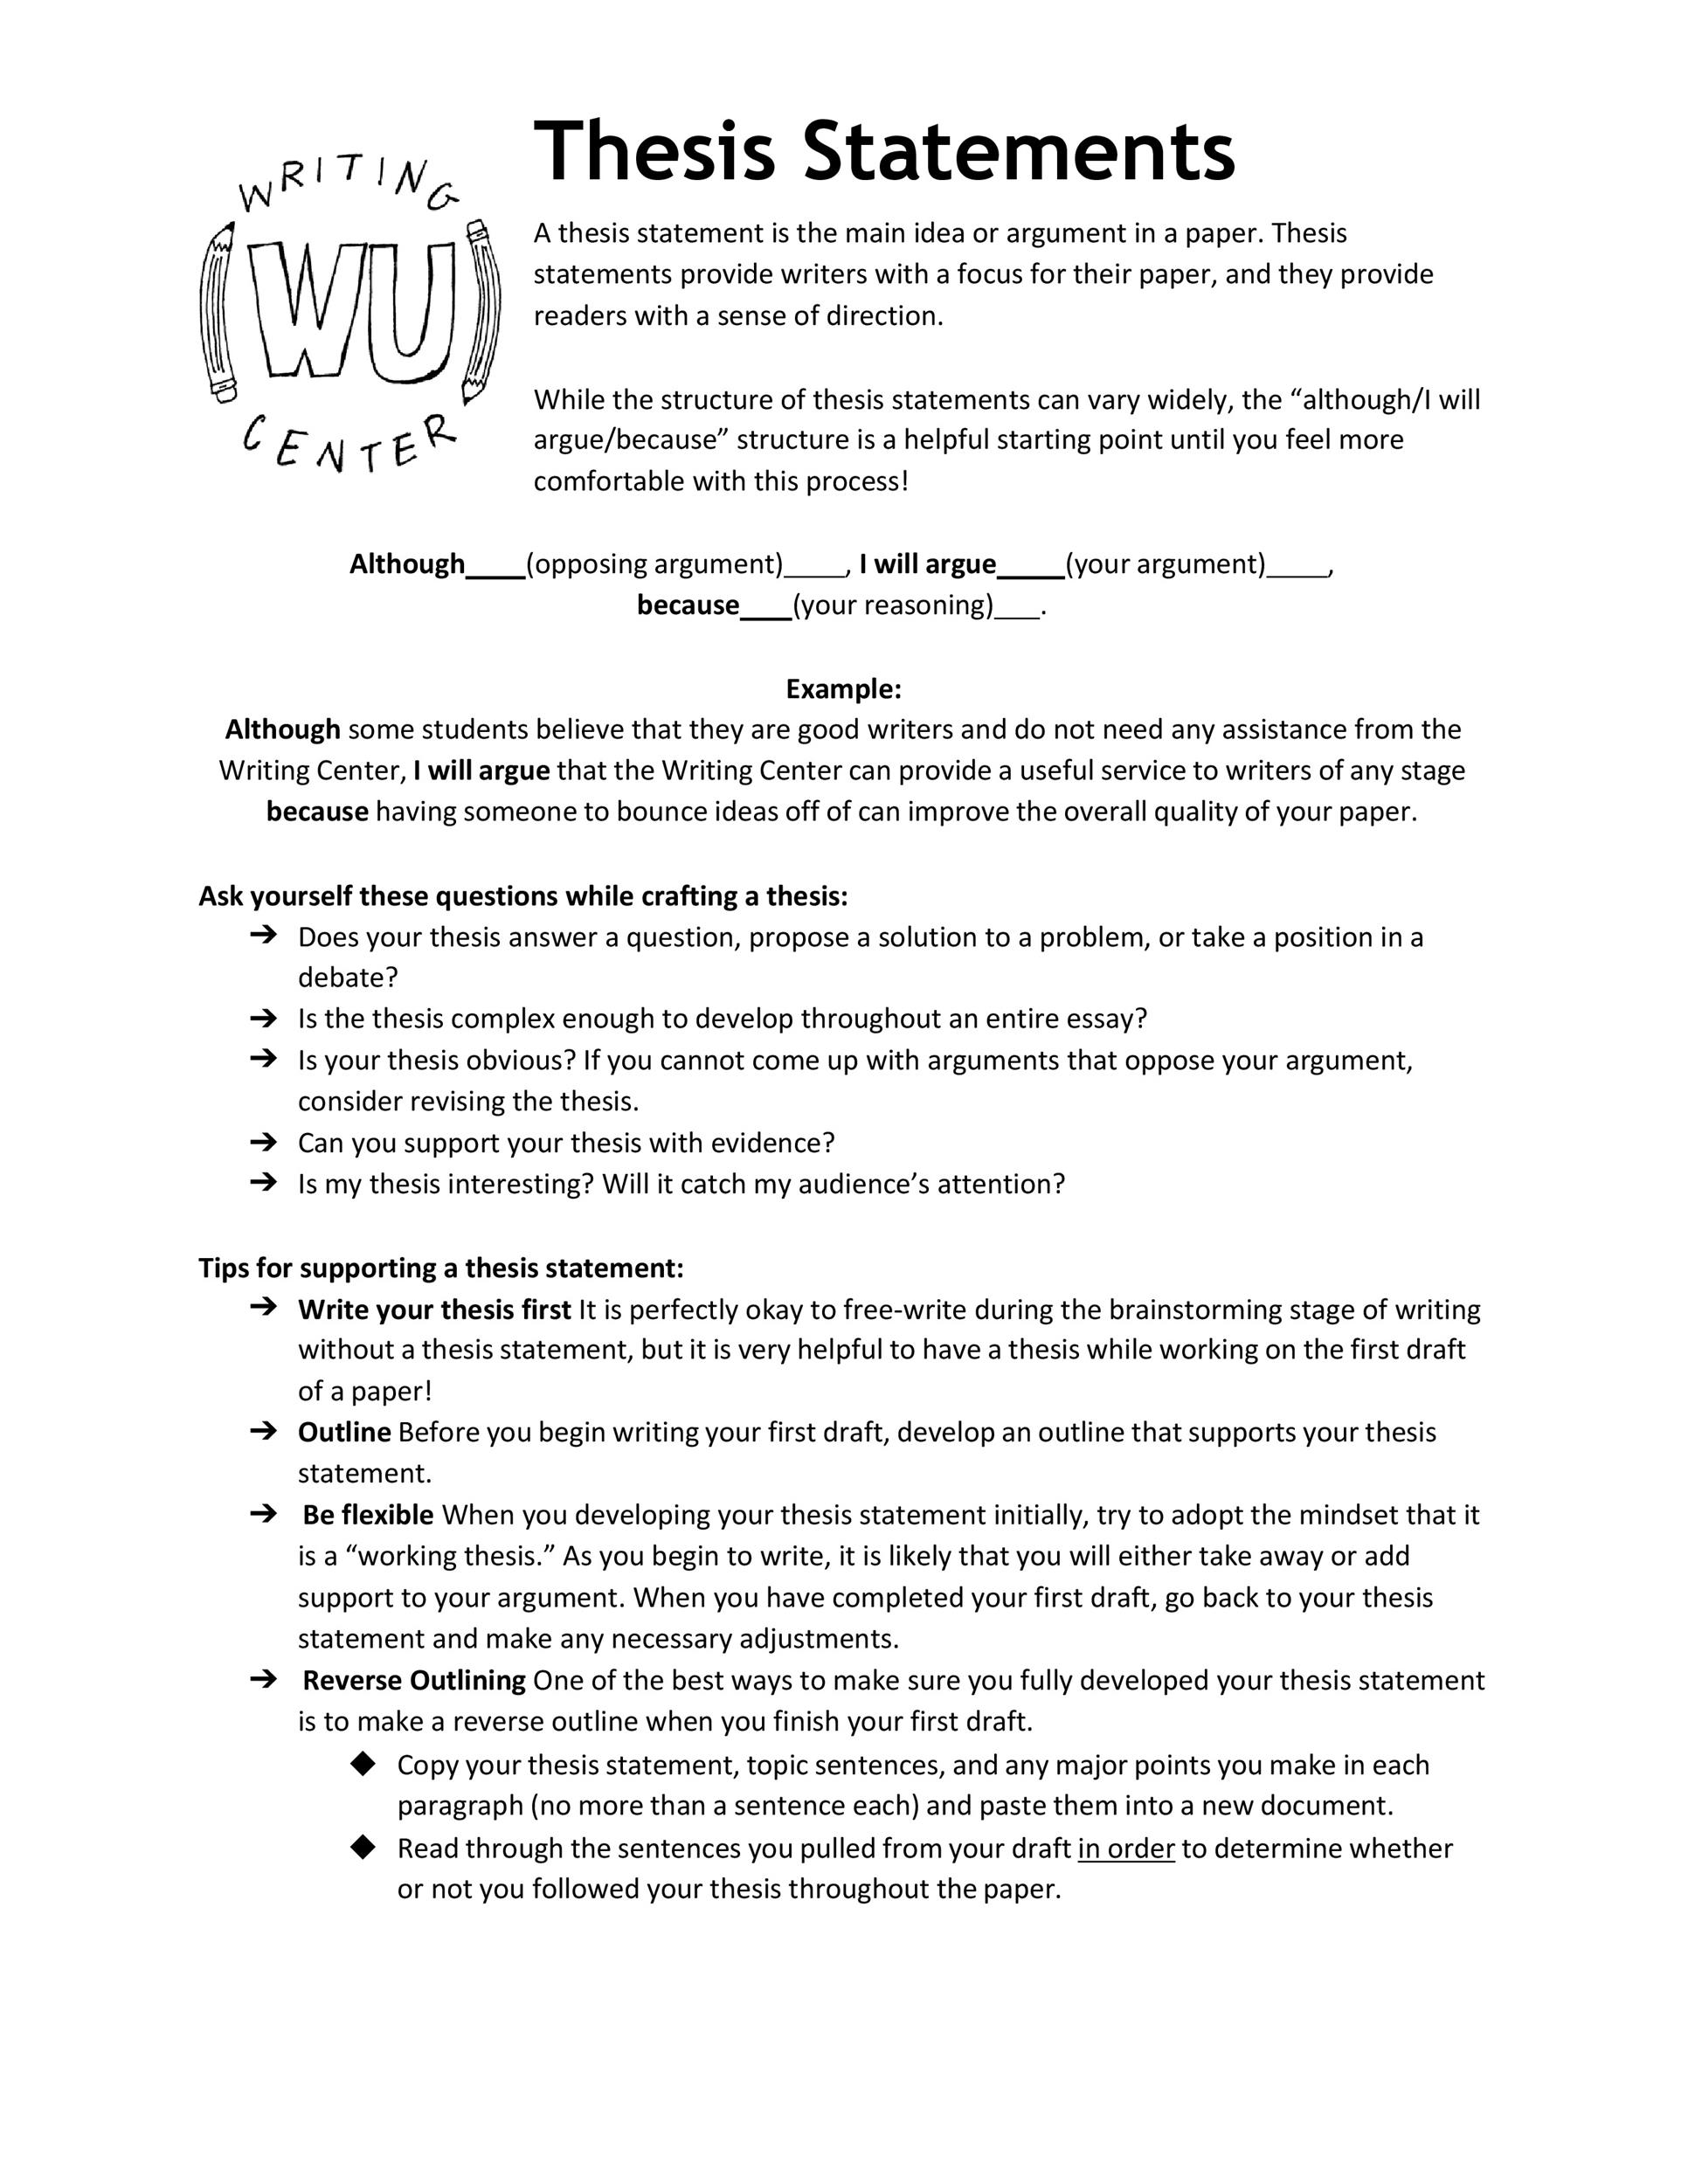 Free thesis statement template 17